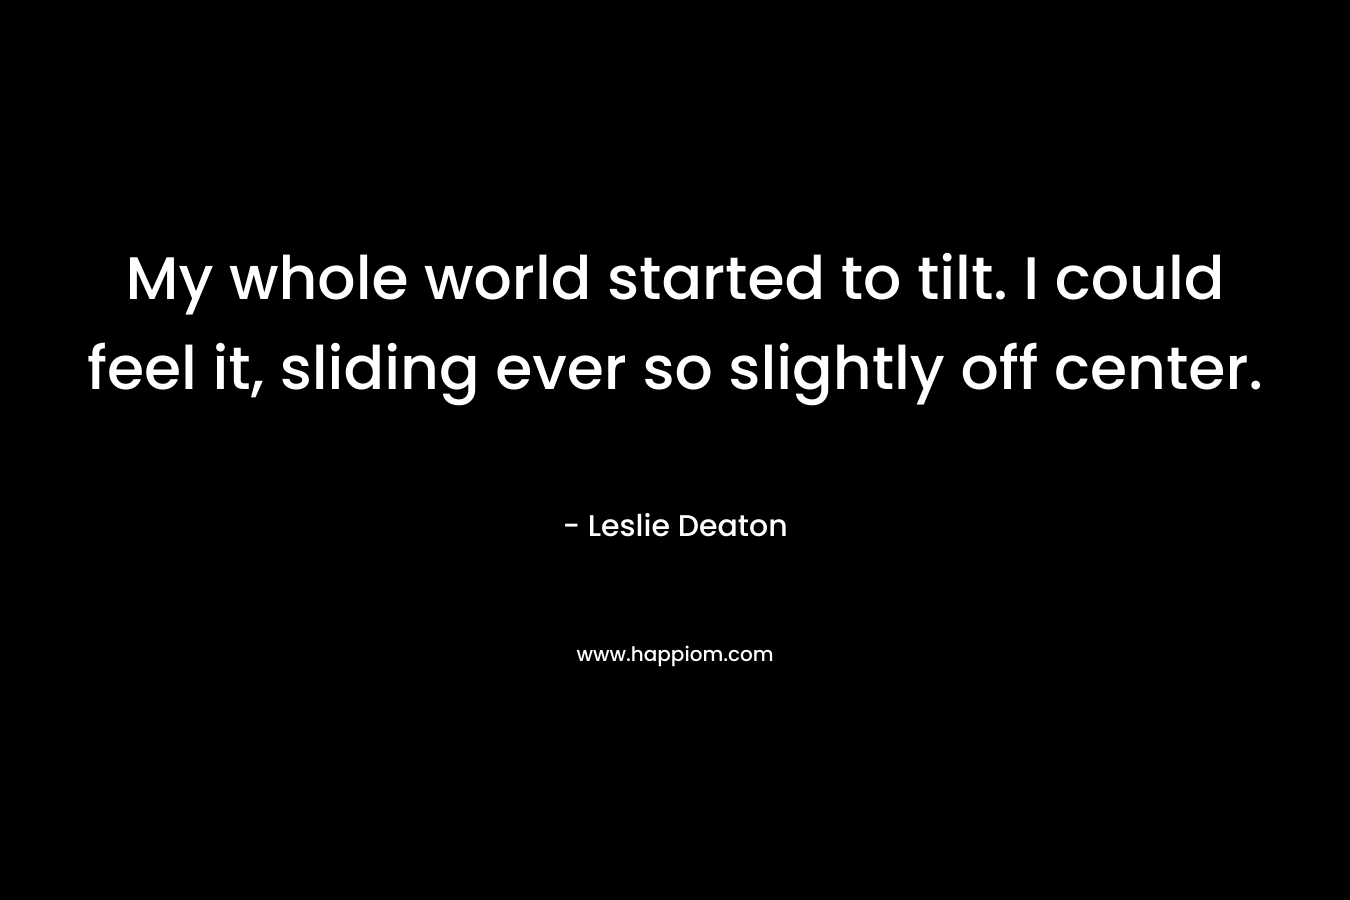 My whole world started to tilt. I could feel it, sliding ever so slightly off center. – Leslie Deaton